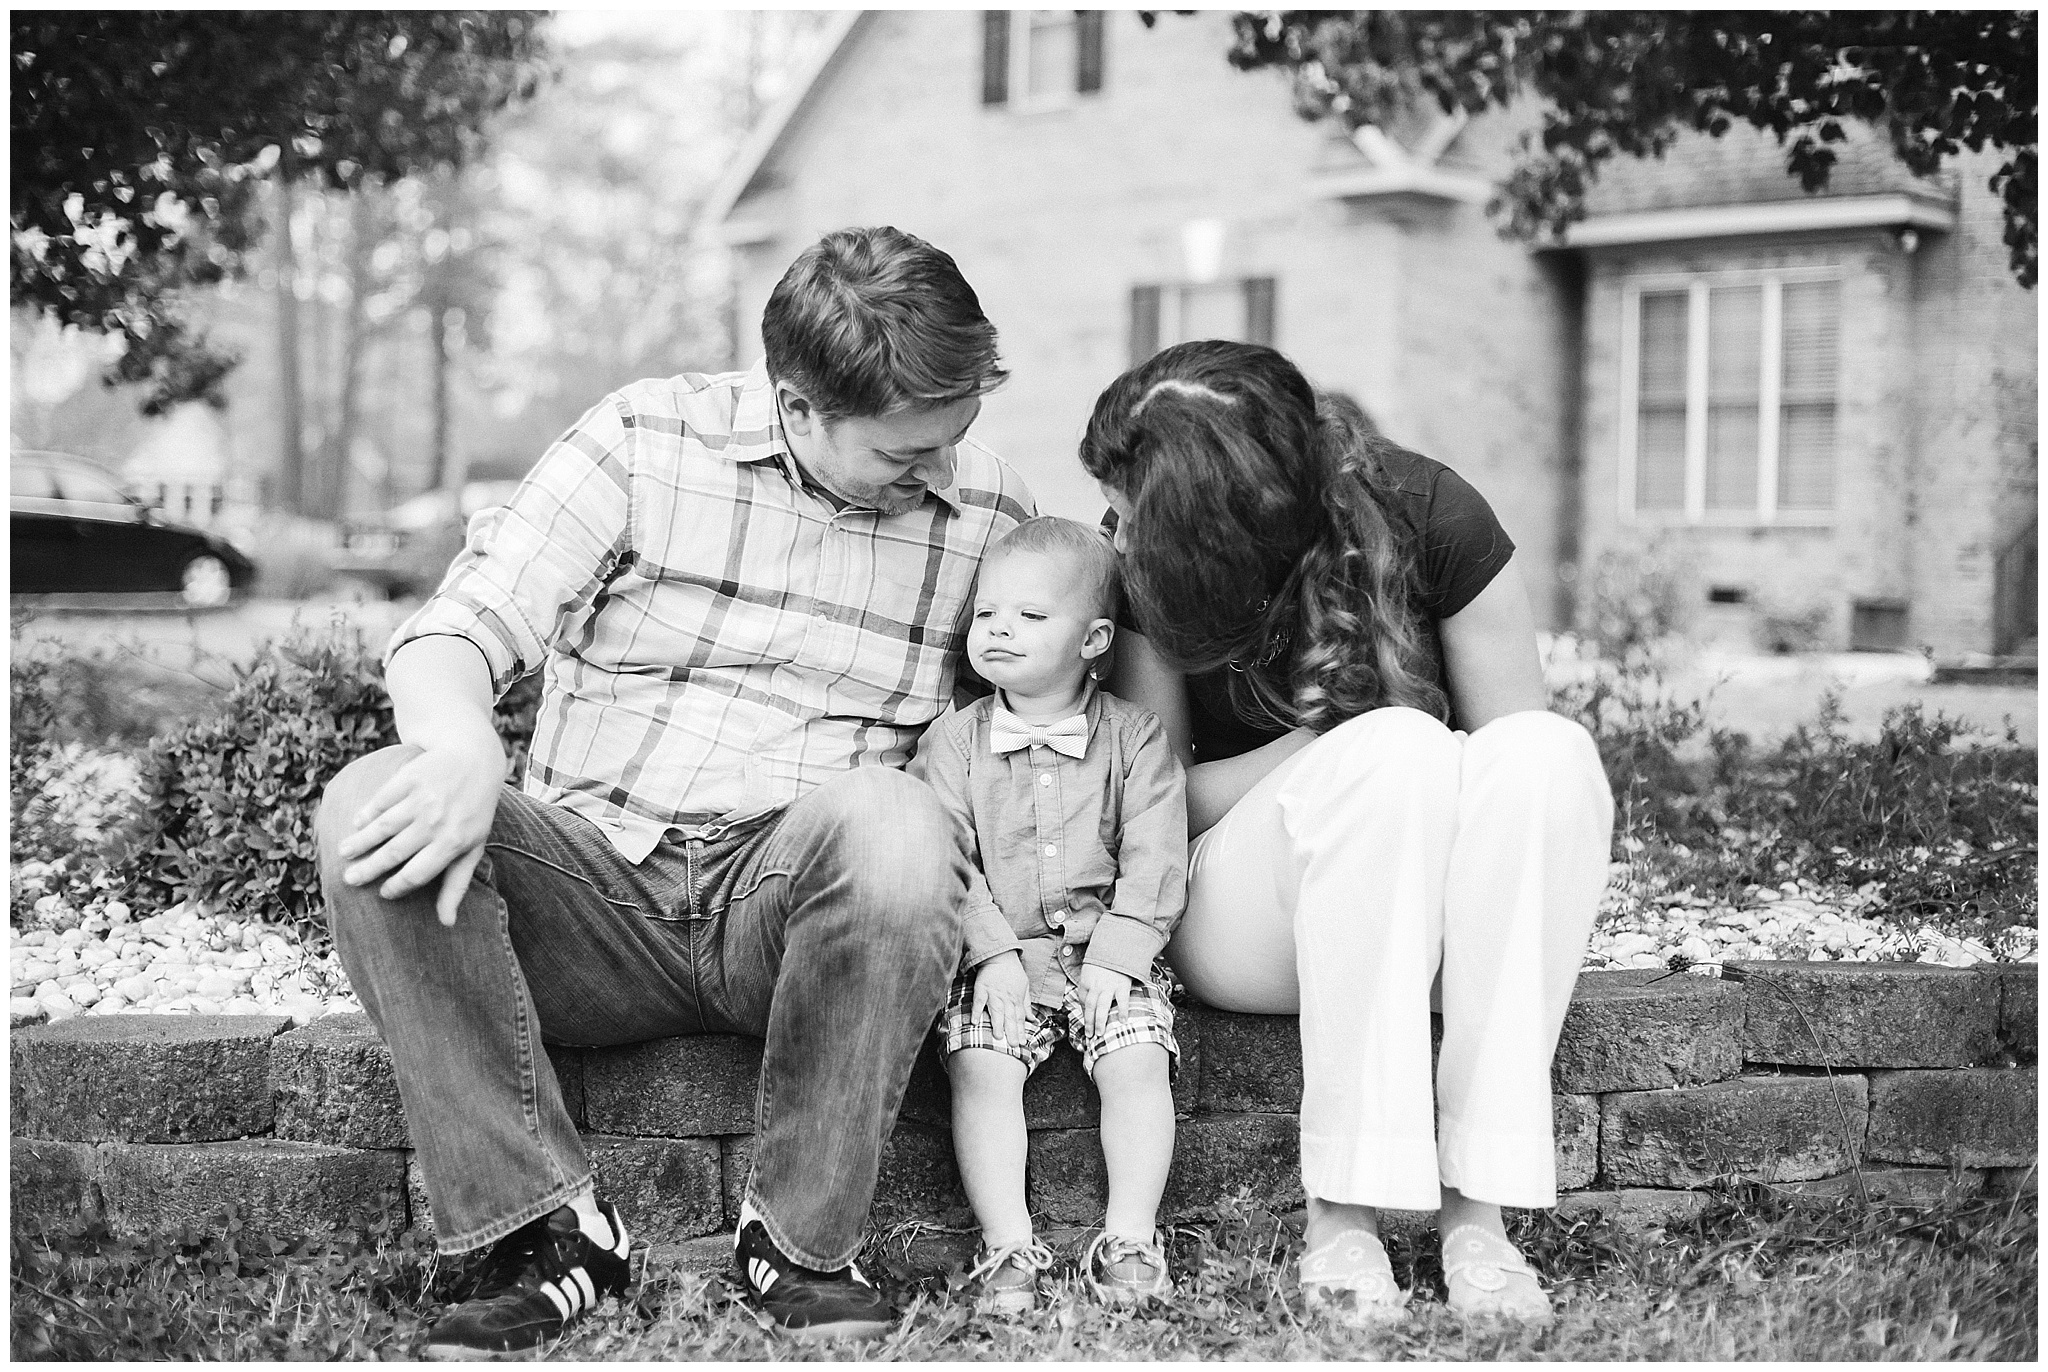 Lifestyle Photography by Five Copper Creative in Greenville, NC